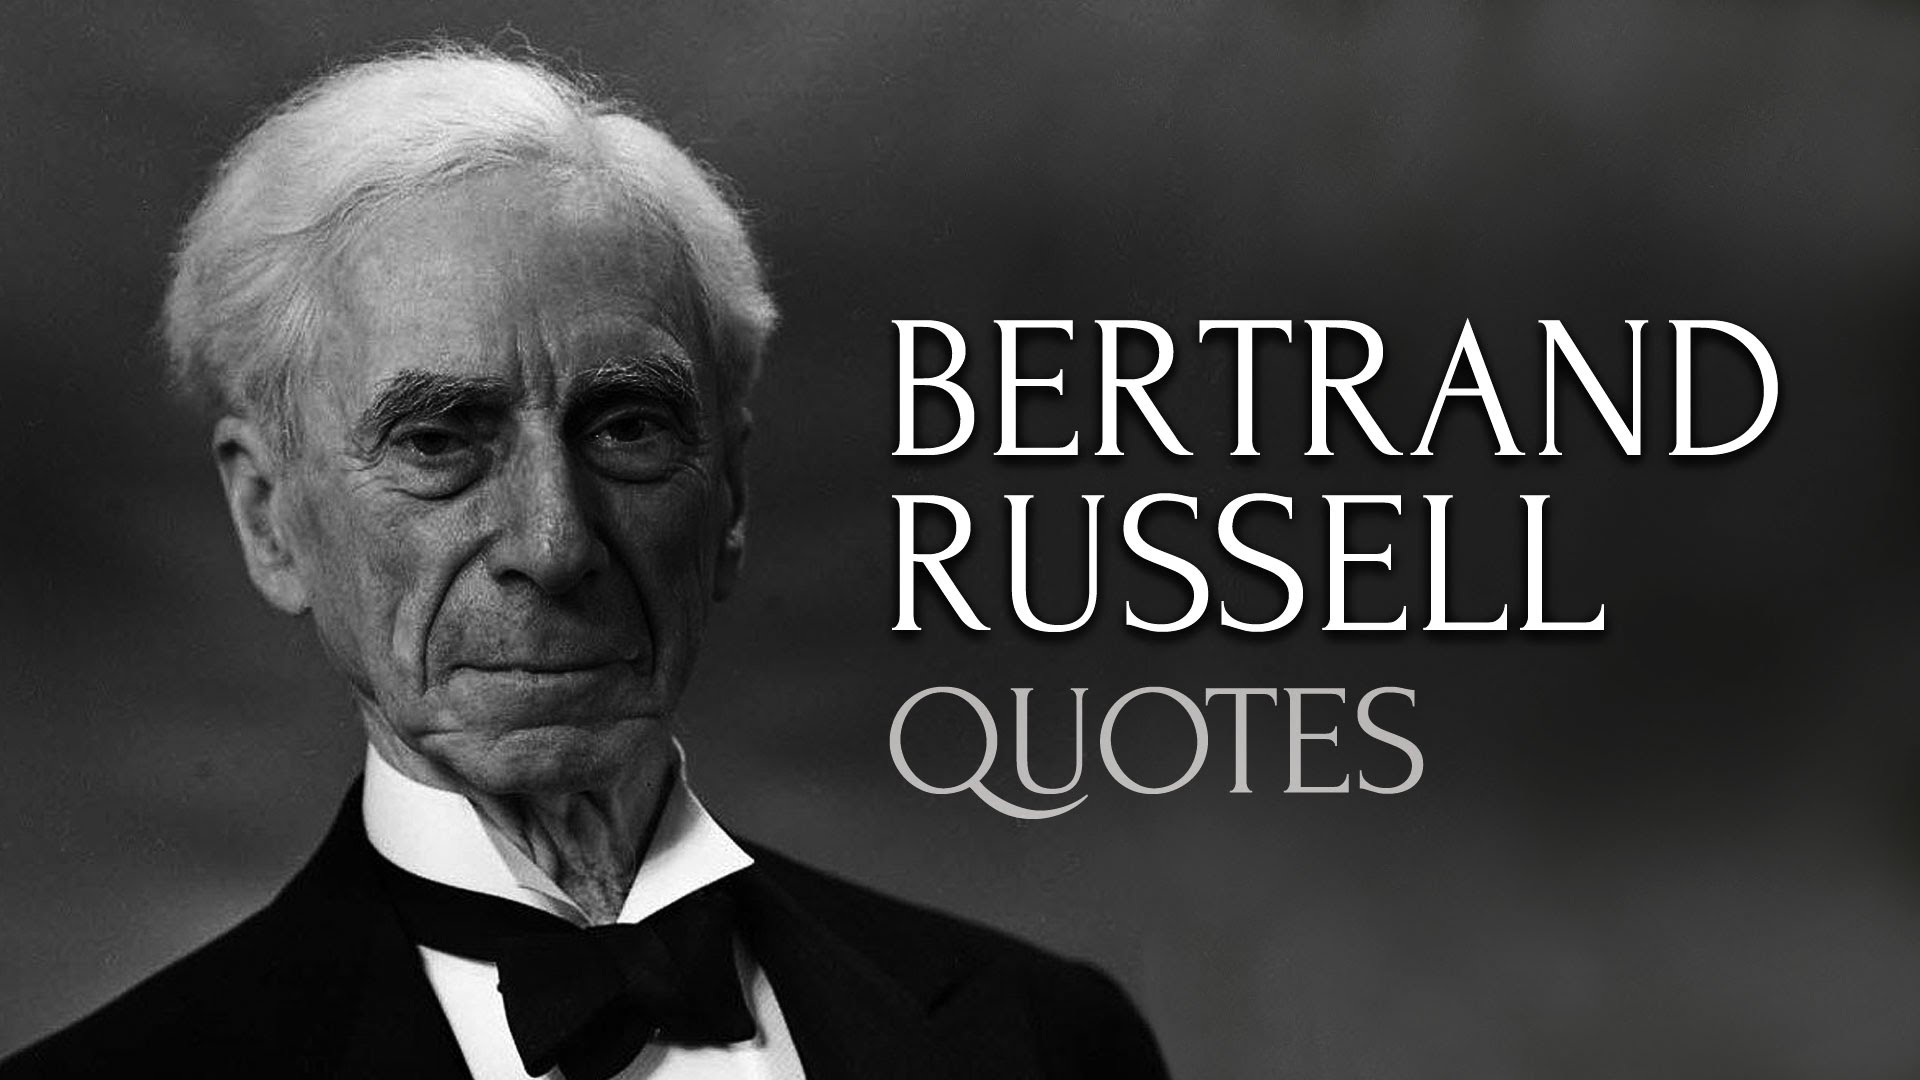 Profound Quotes by Bertrand Russell. Great Minds TV: Upvote Your IQ